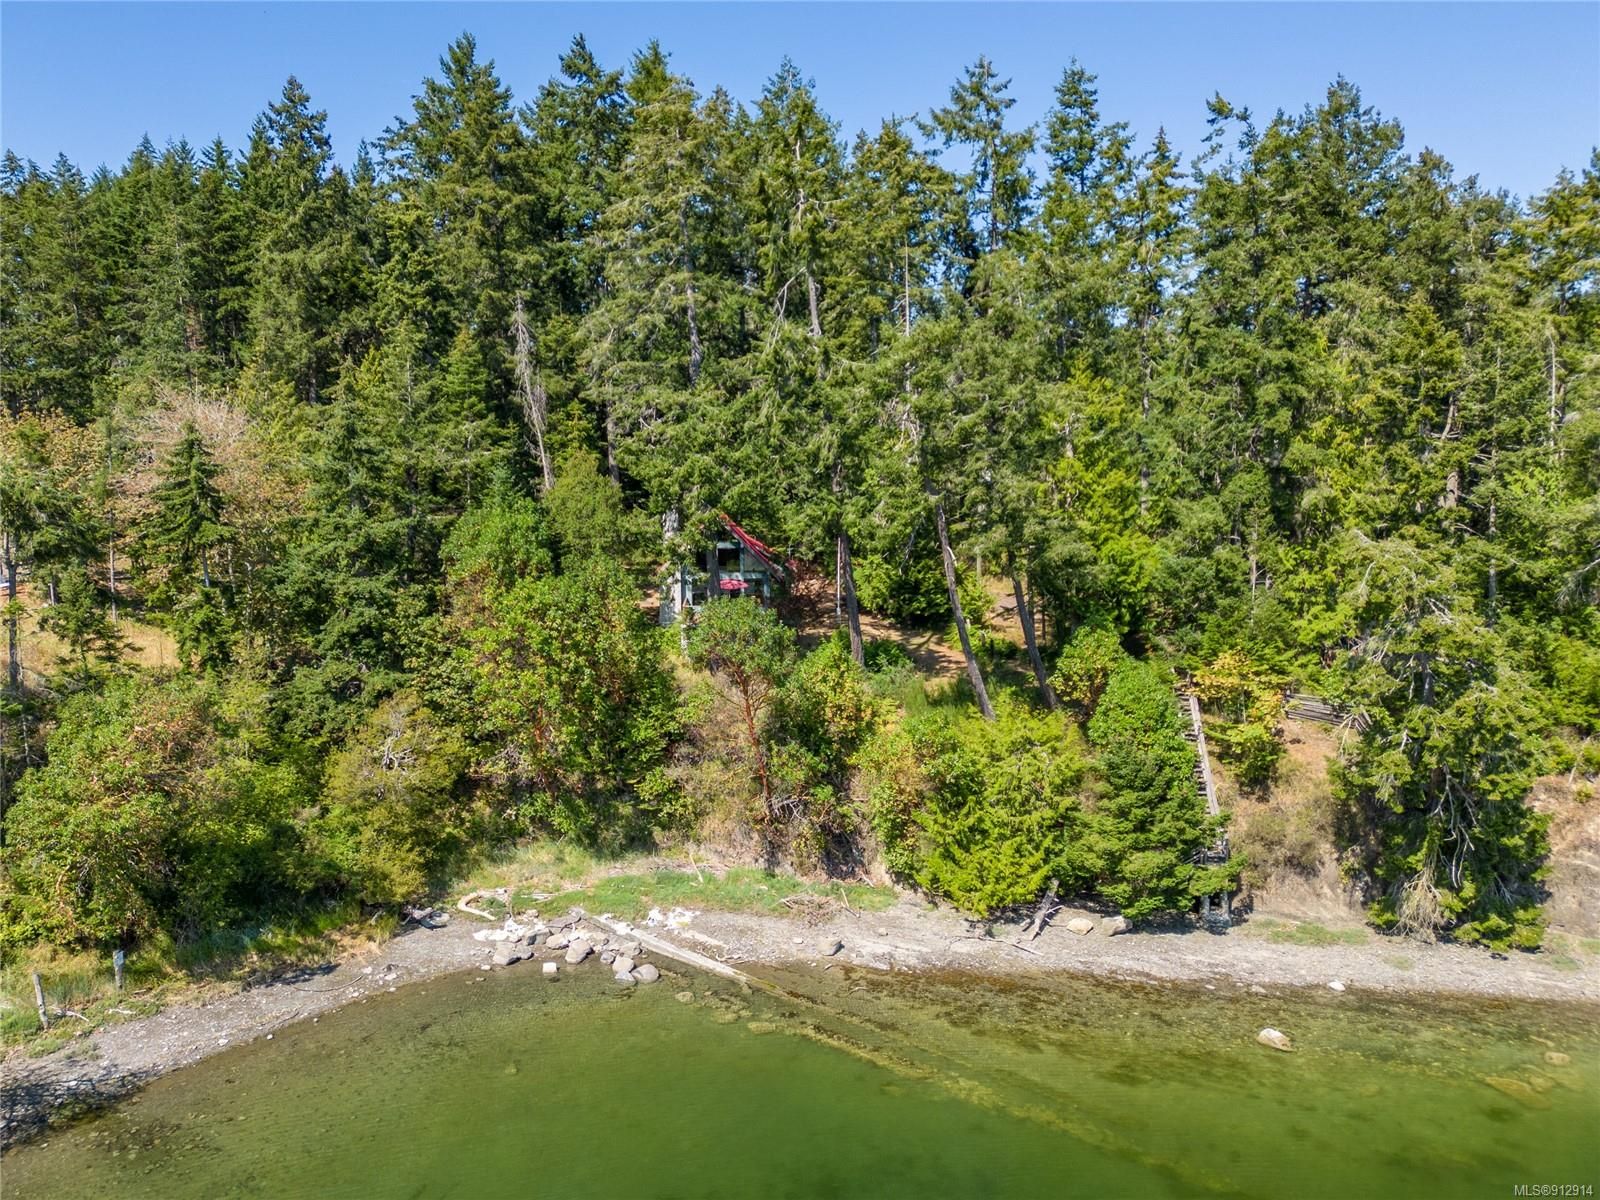 I have sold a property at 4602 Pecos Rd in Pender Island
